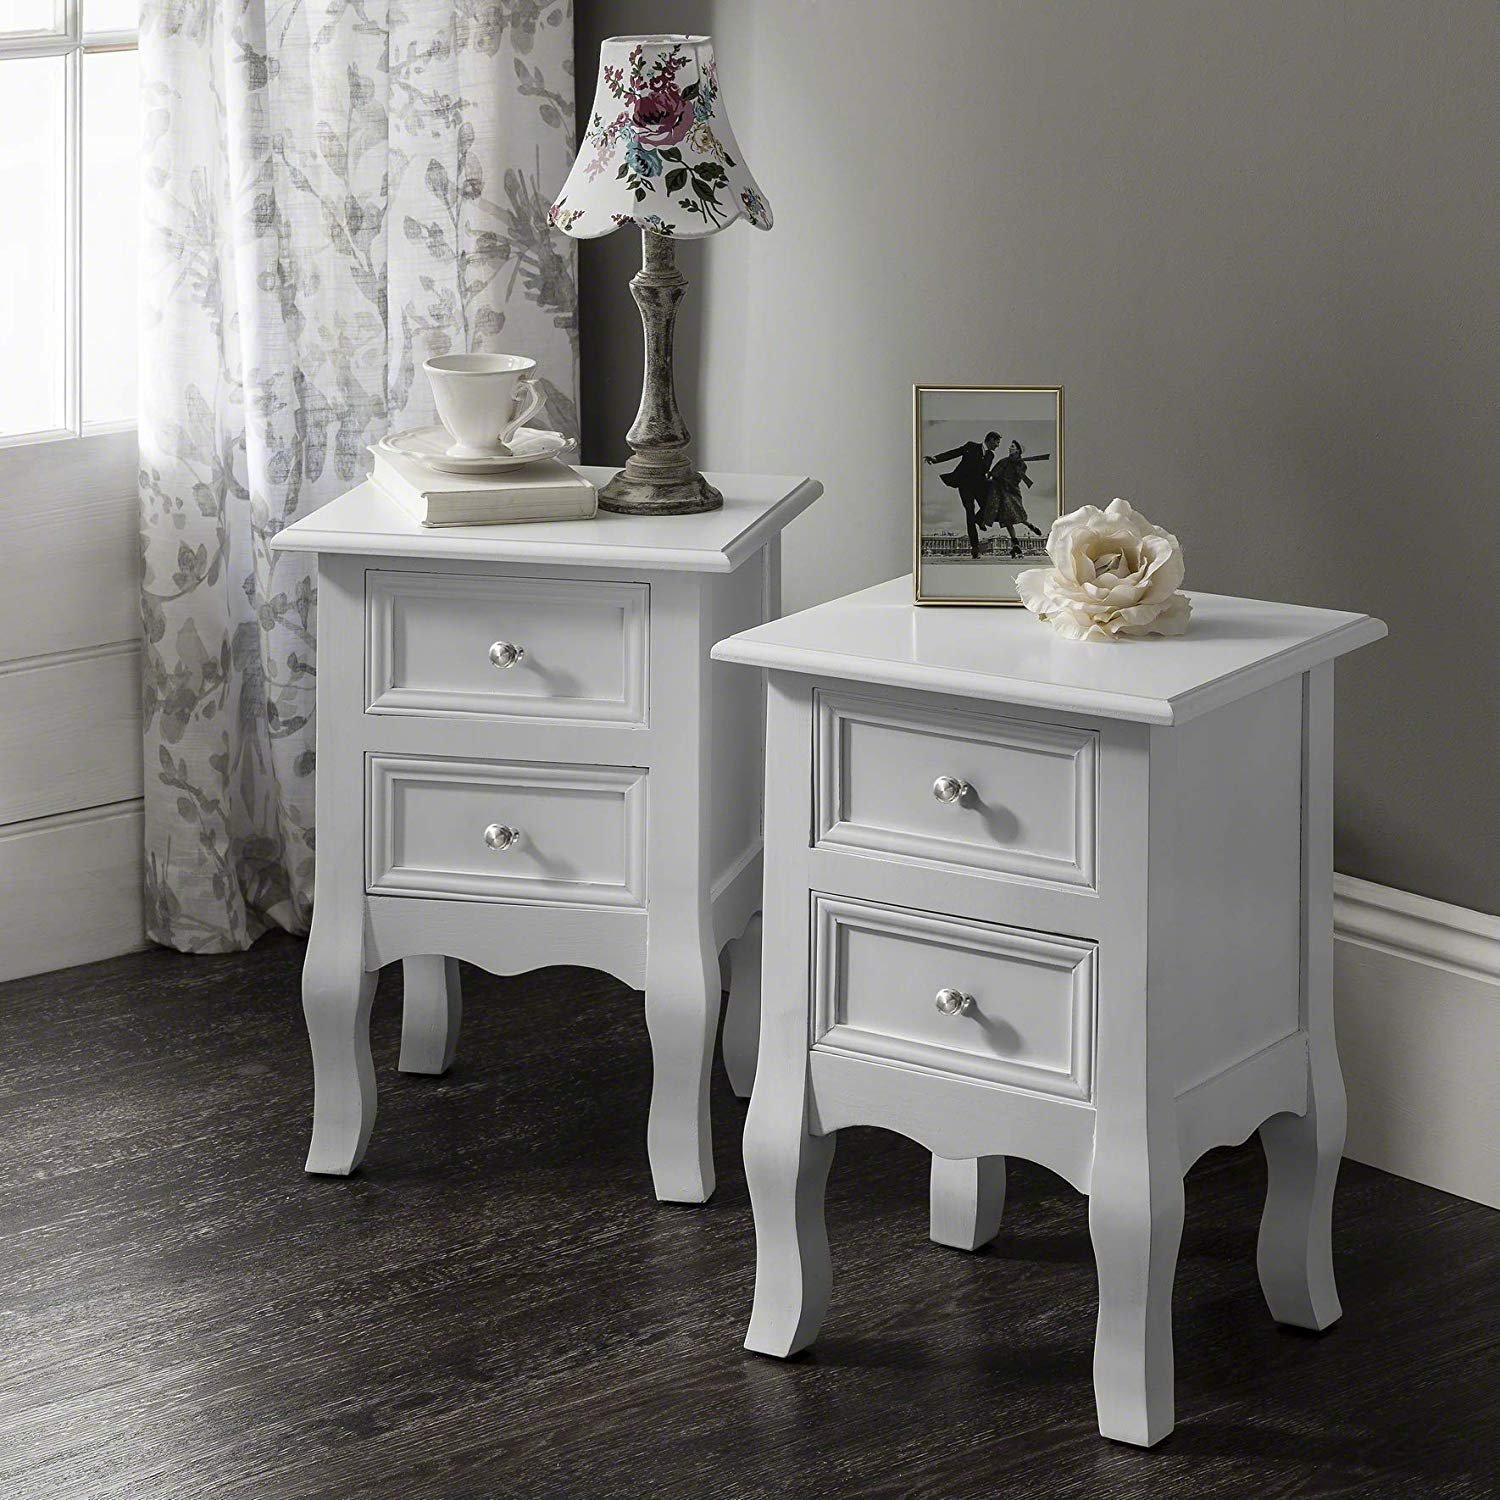 Gaea Wooden Bedside Table Set of 2 – White